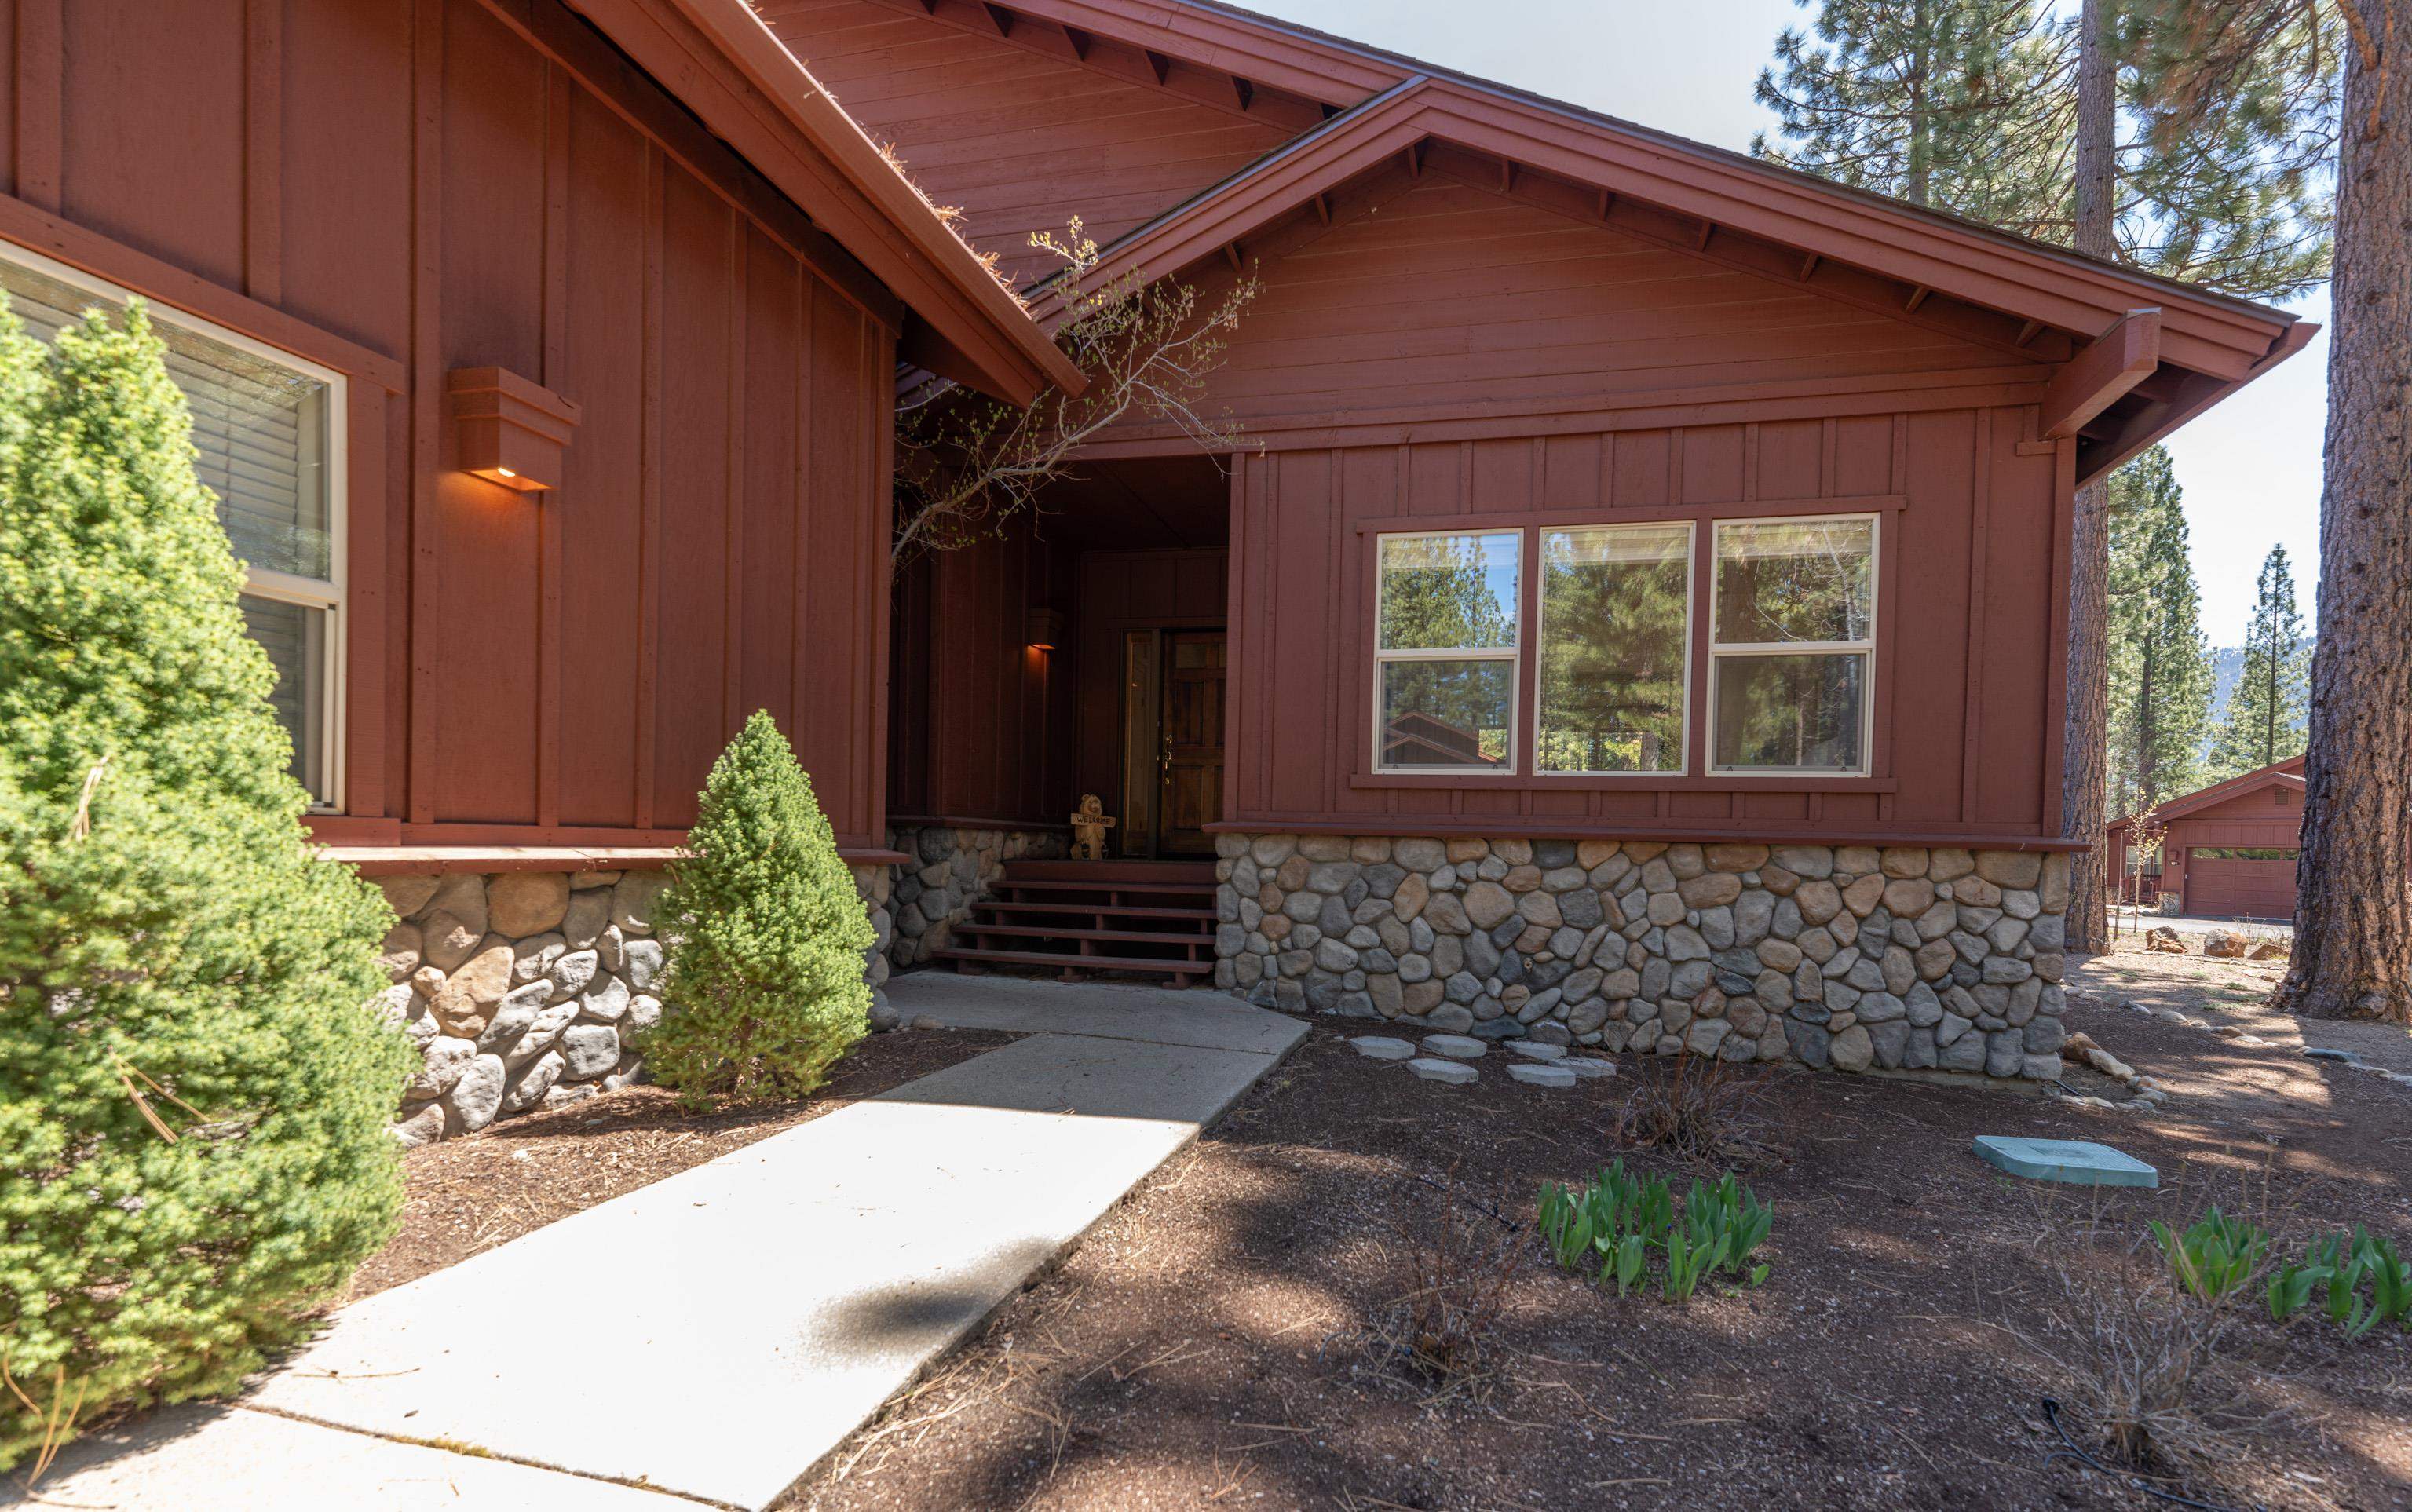 Image for 35 One Horse Way, Clio, CA 96106-0000